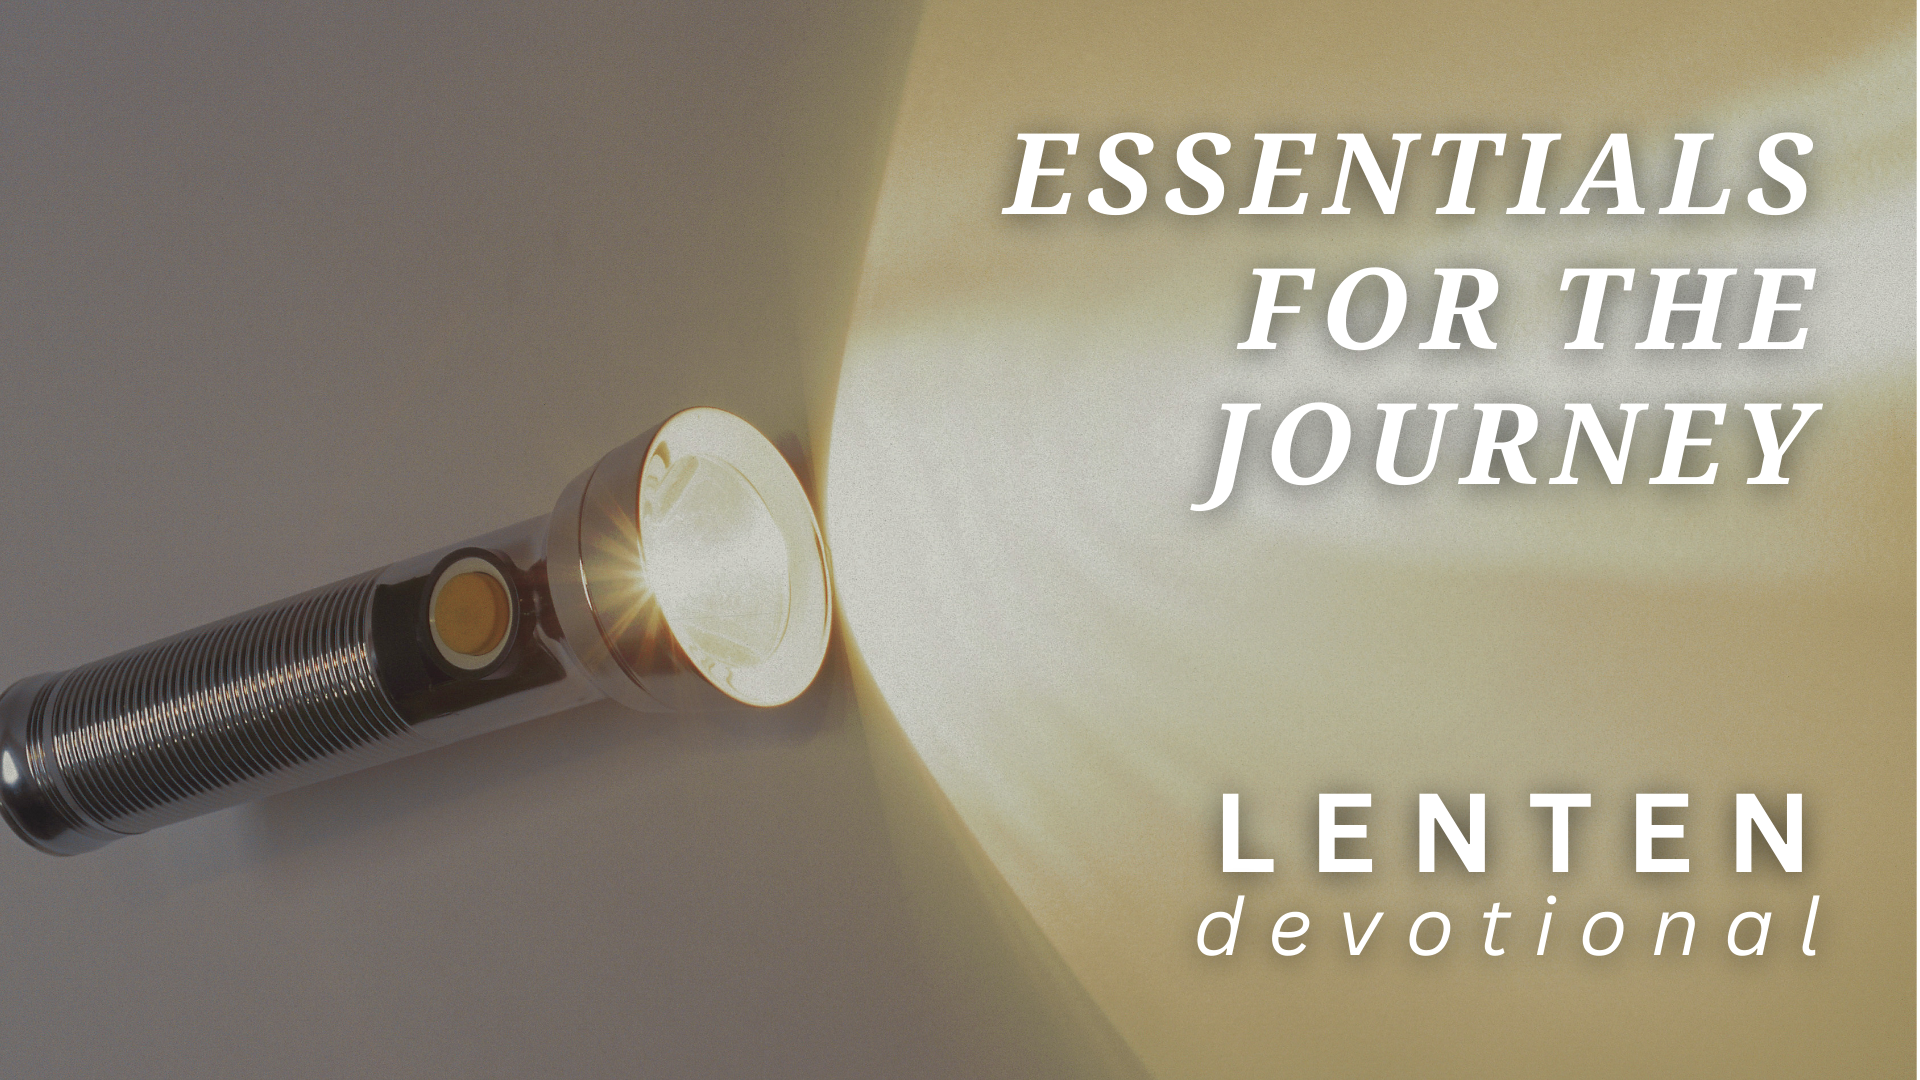 image of flashlight with text that reads essentials for the journey and lenten devotionals